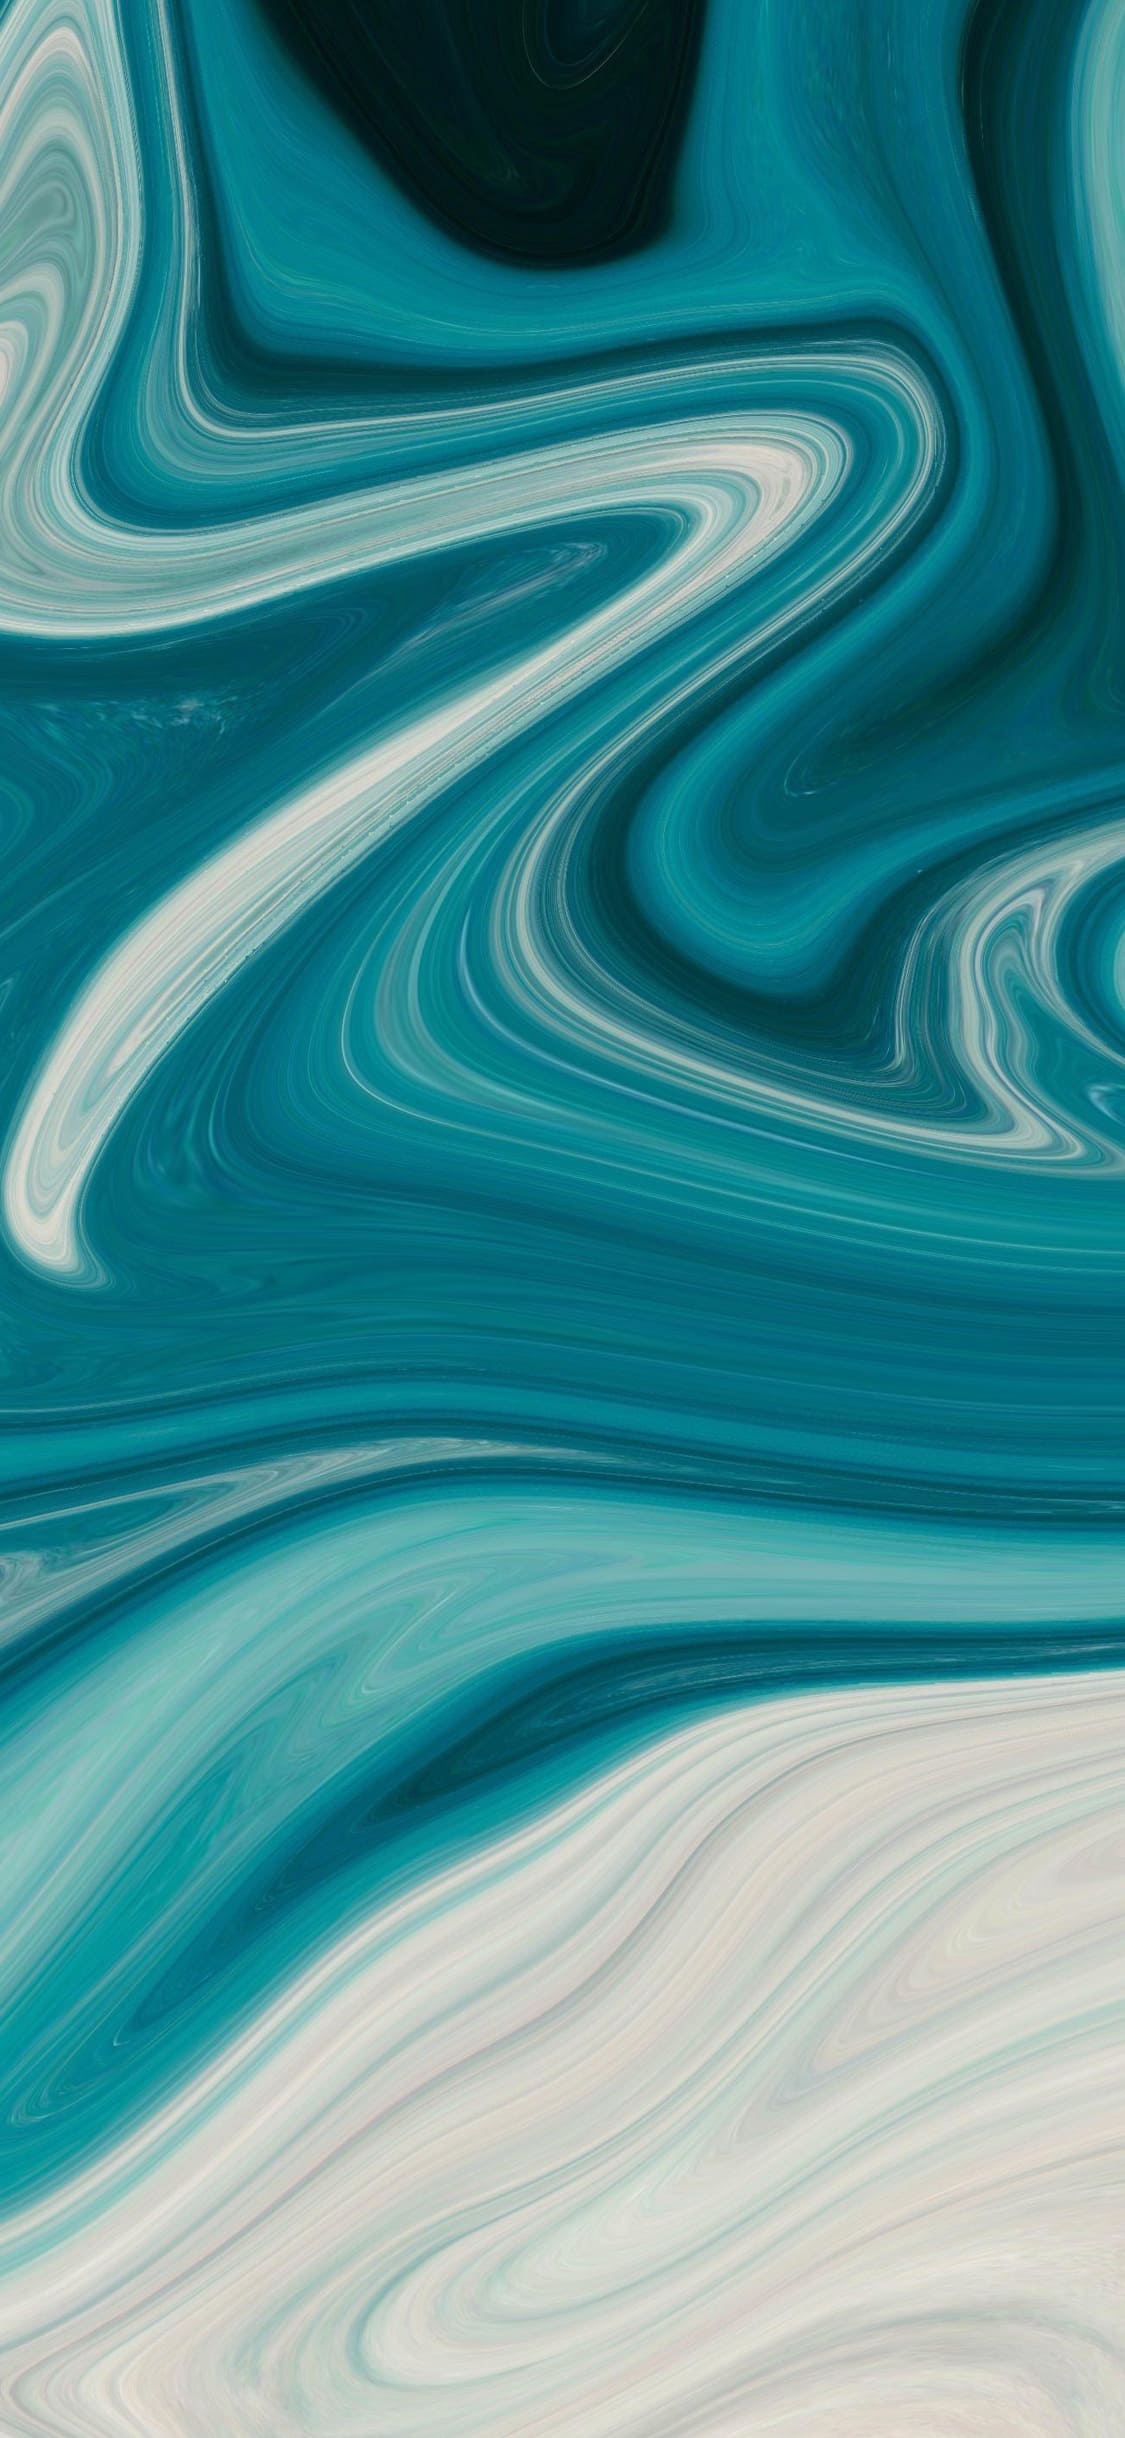 Download The New Default iOS 12 Wallpaper For iPhone, iPad